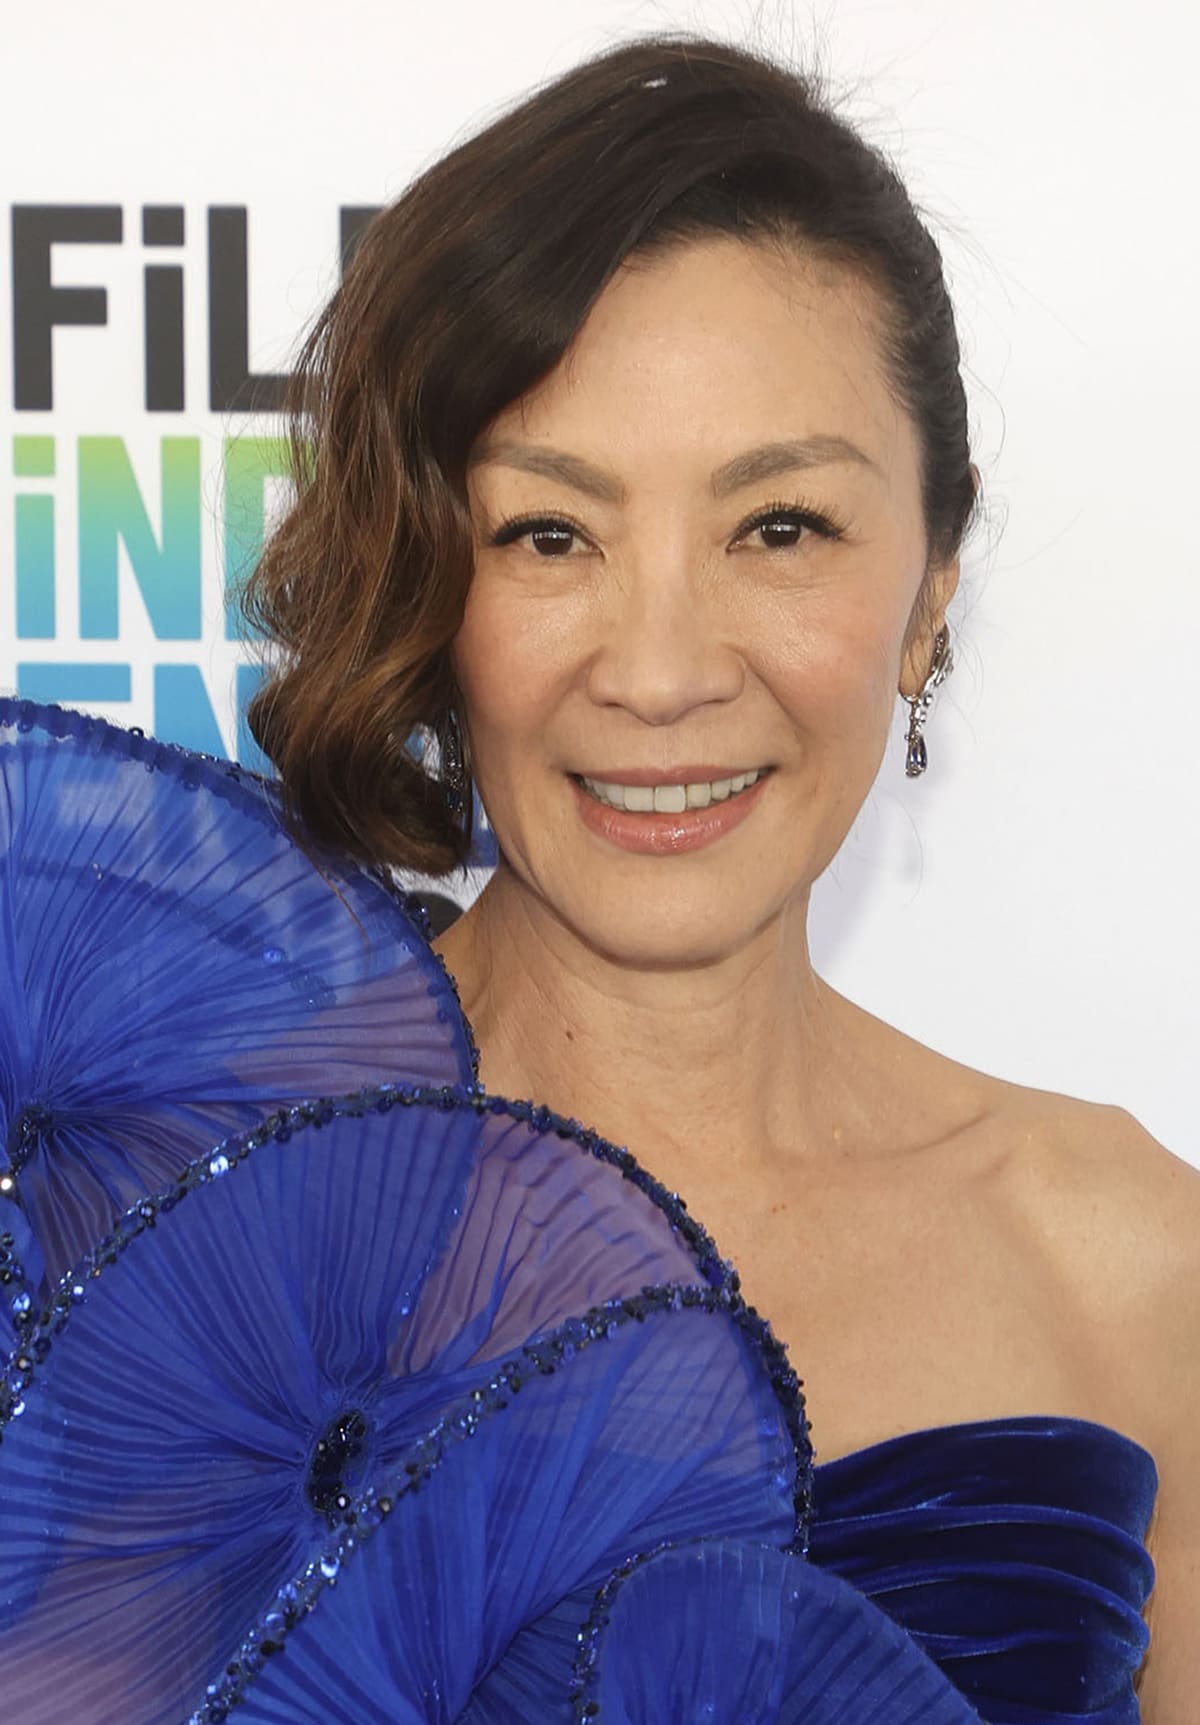 Michelle Yeoh wears soft retro curls and curled eyelashes with mascara and eyeliner